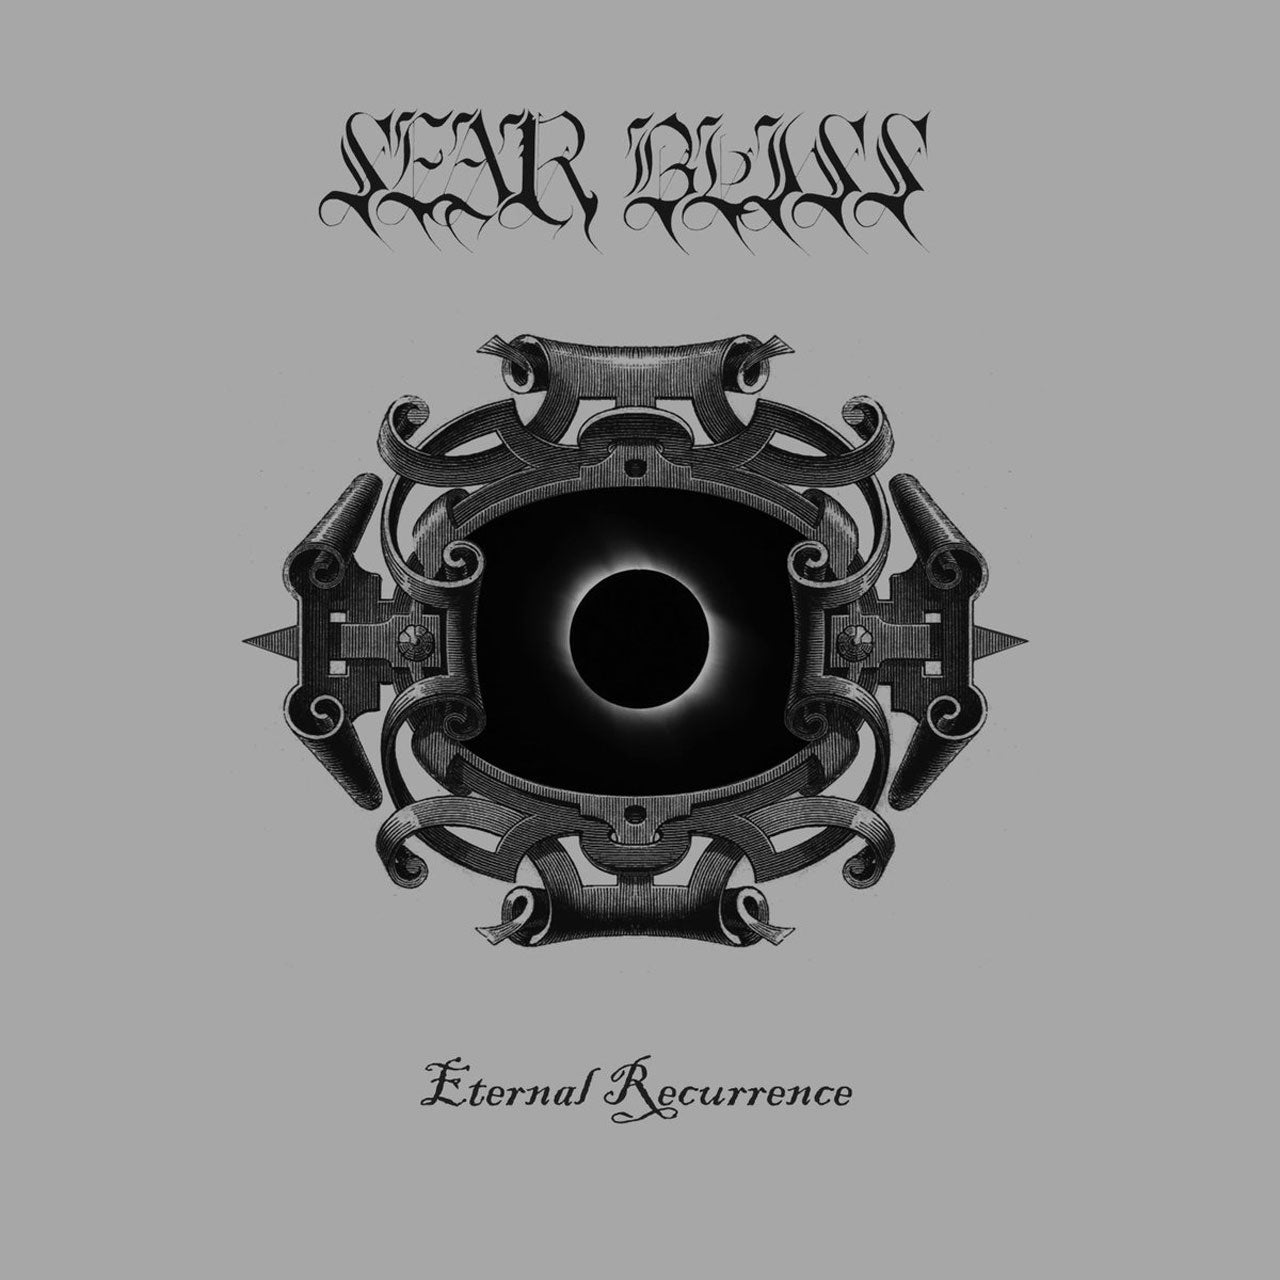 Sear Bliss - Eternal Recurrence (CD)